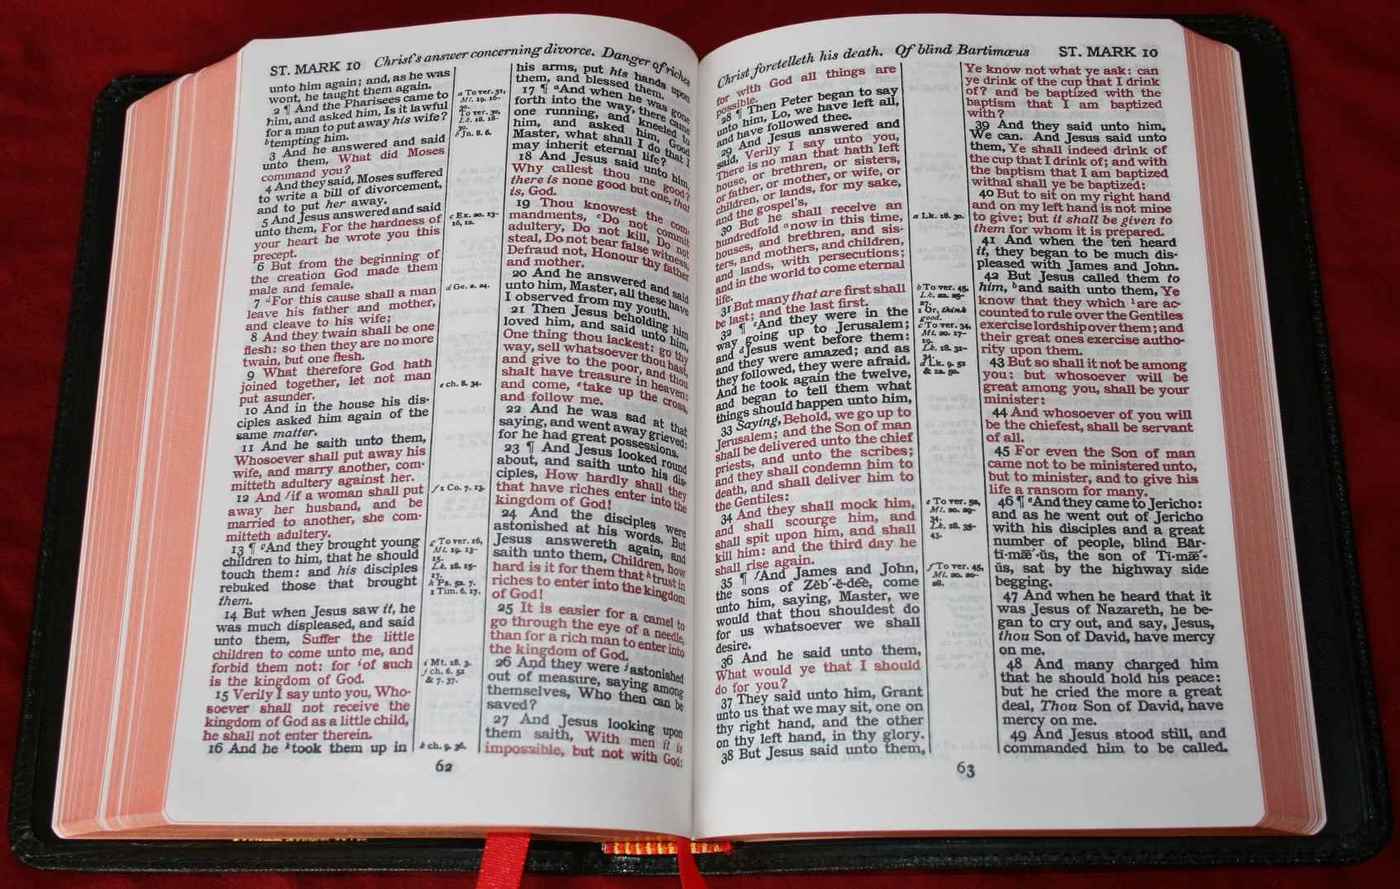 Photograph of a Cambridge KJV Concord Reference Bible (1999?), showing ‘red letter verses’; by Randy A. Brown, 2011